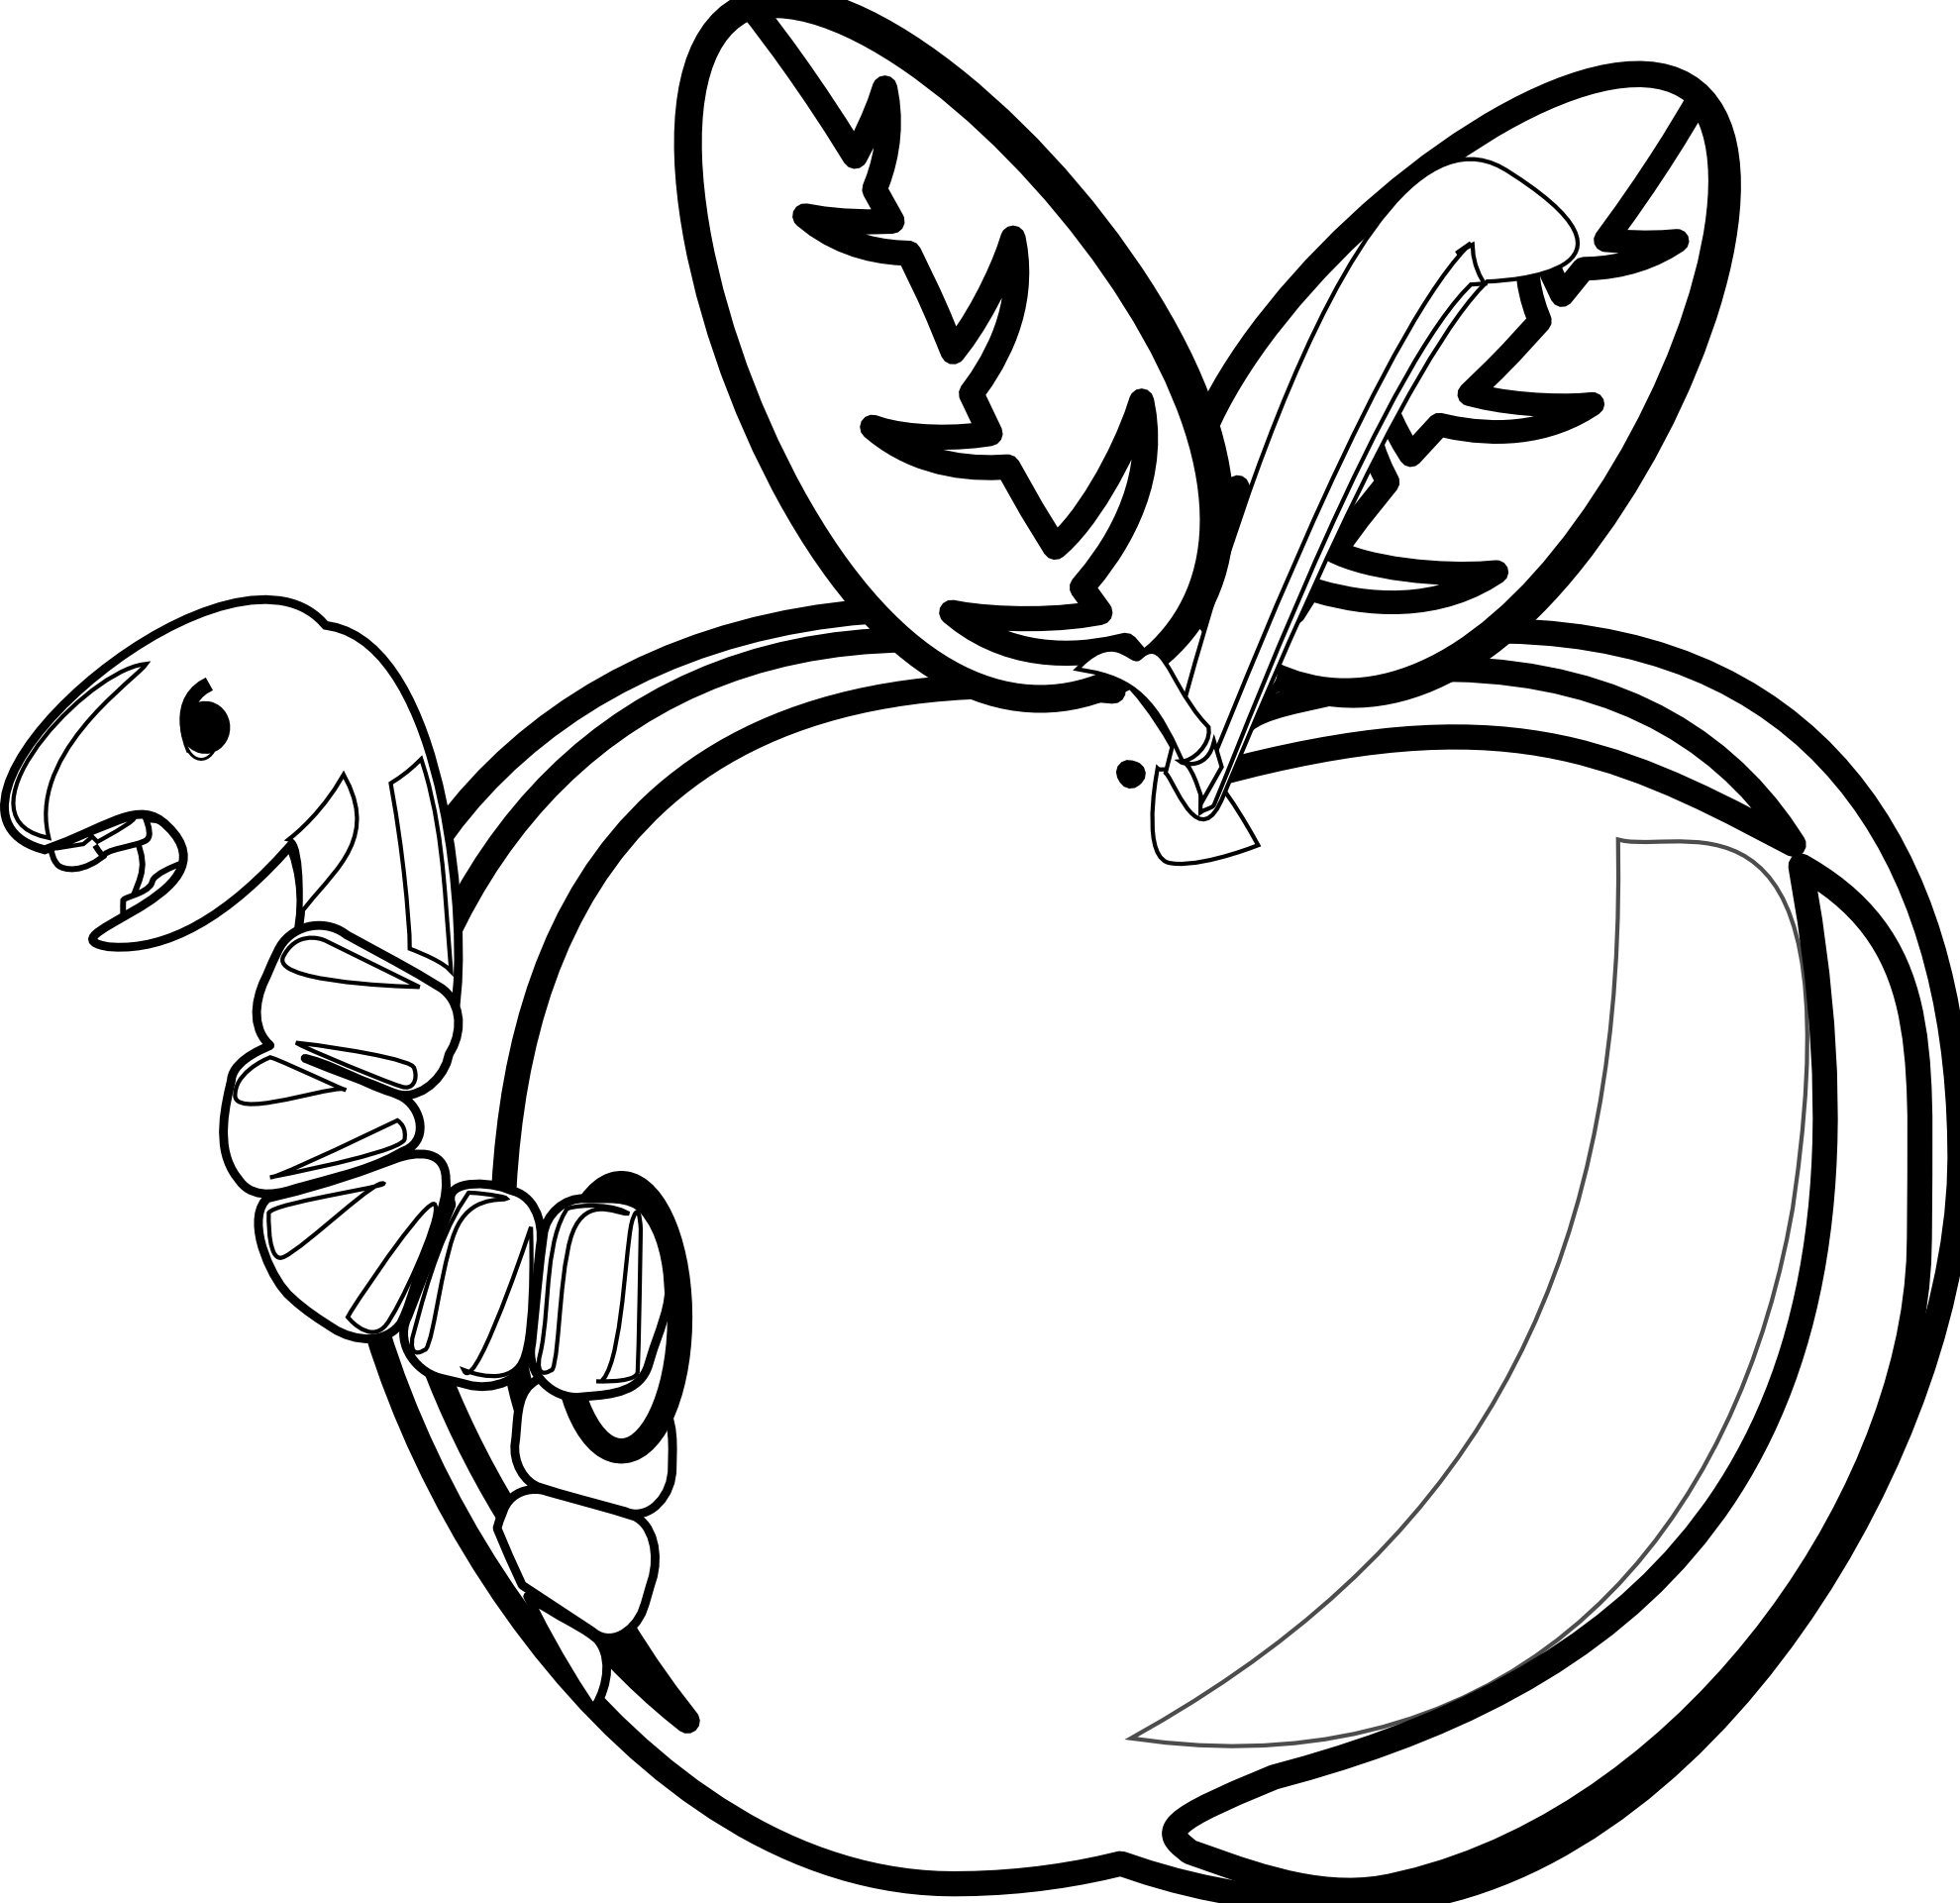 Apple black and white rg 1 cartoon apple with worm black white ...